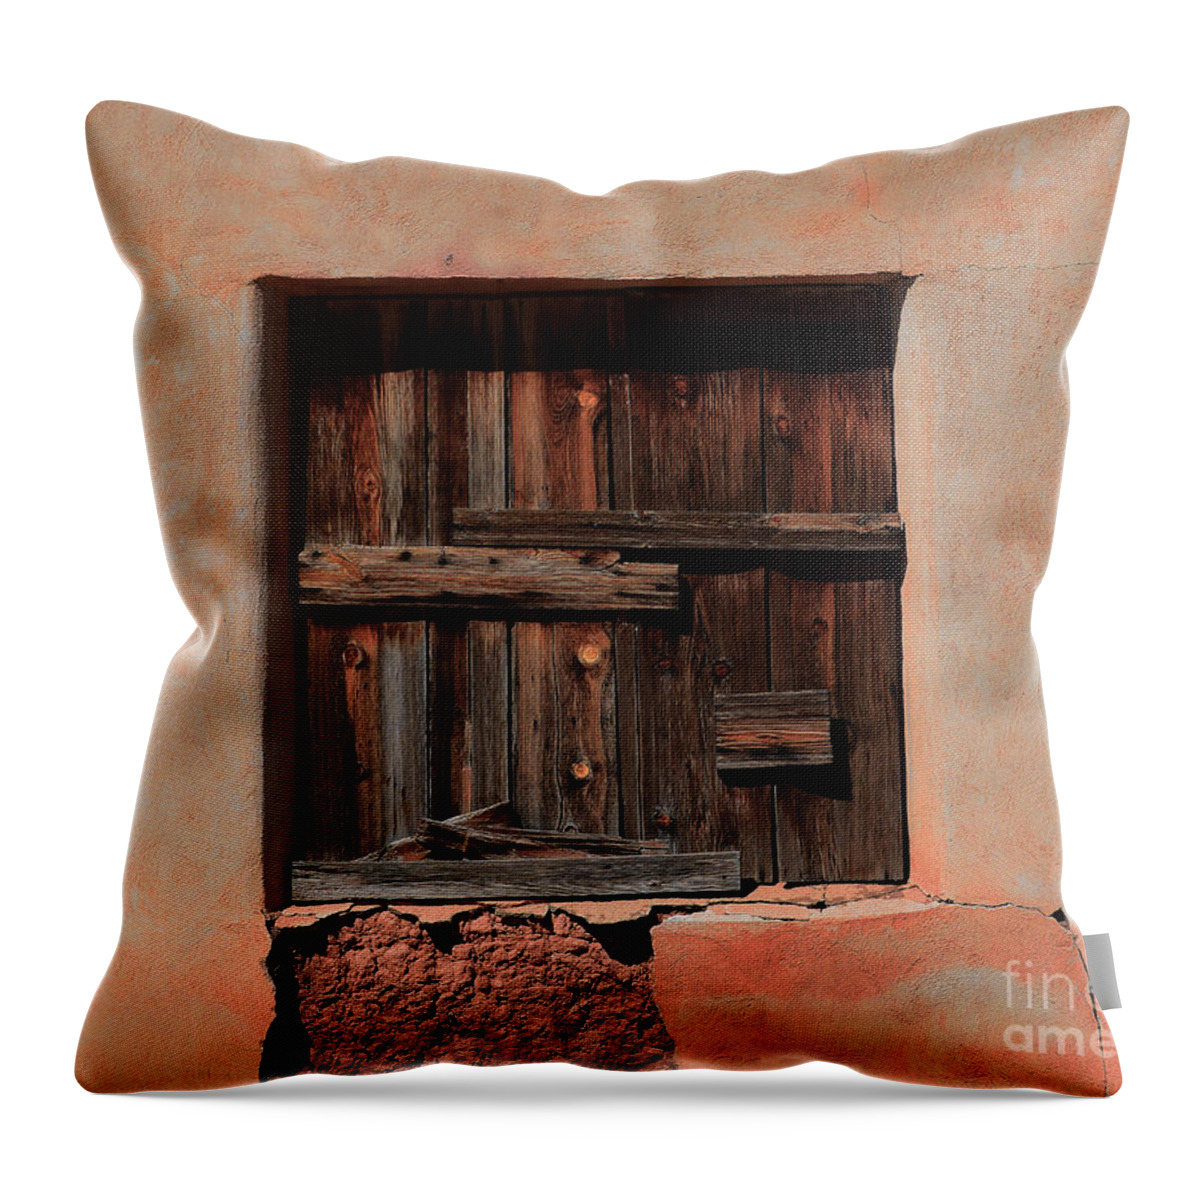 Adobe Throw Pillow featuring the photograph Wooden Shutters in Adobe House by Catherine Sherman